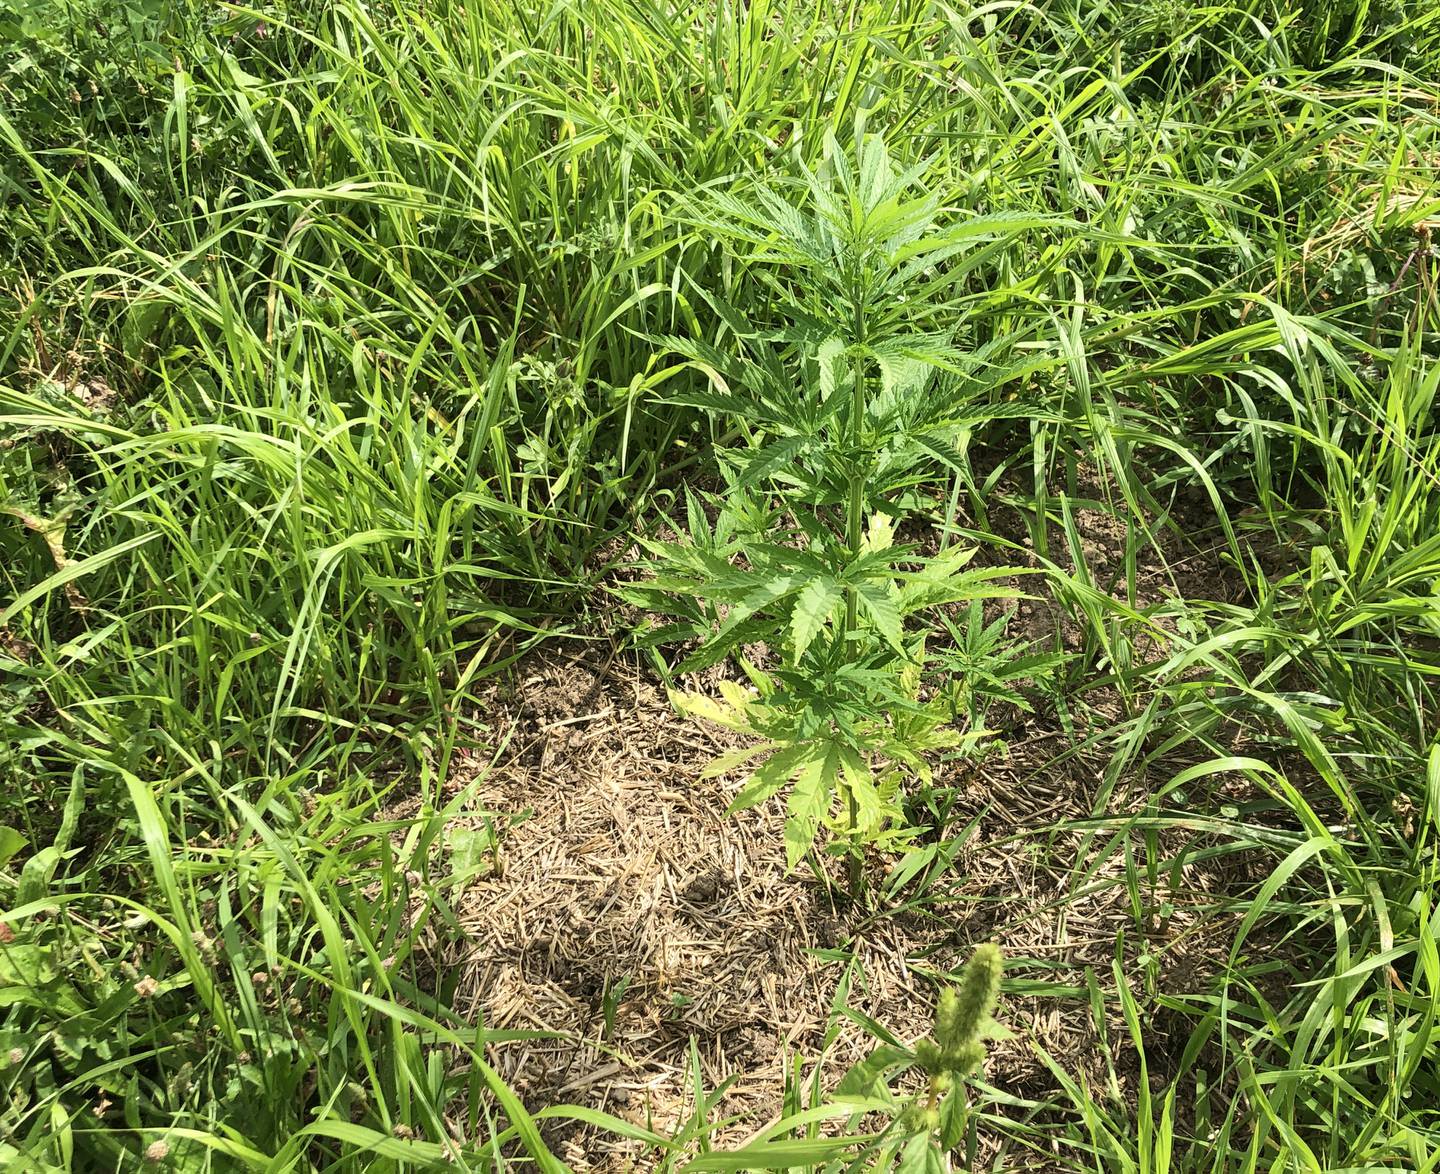 A hemp plant in the fields at Hempstock Pharm outside of Woodstock on Aug. 6, 2022. Stacy McCaskill and family began the hemp operation in 2019 and offer CBD products made from the plants grown there.